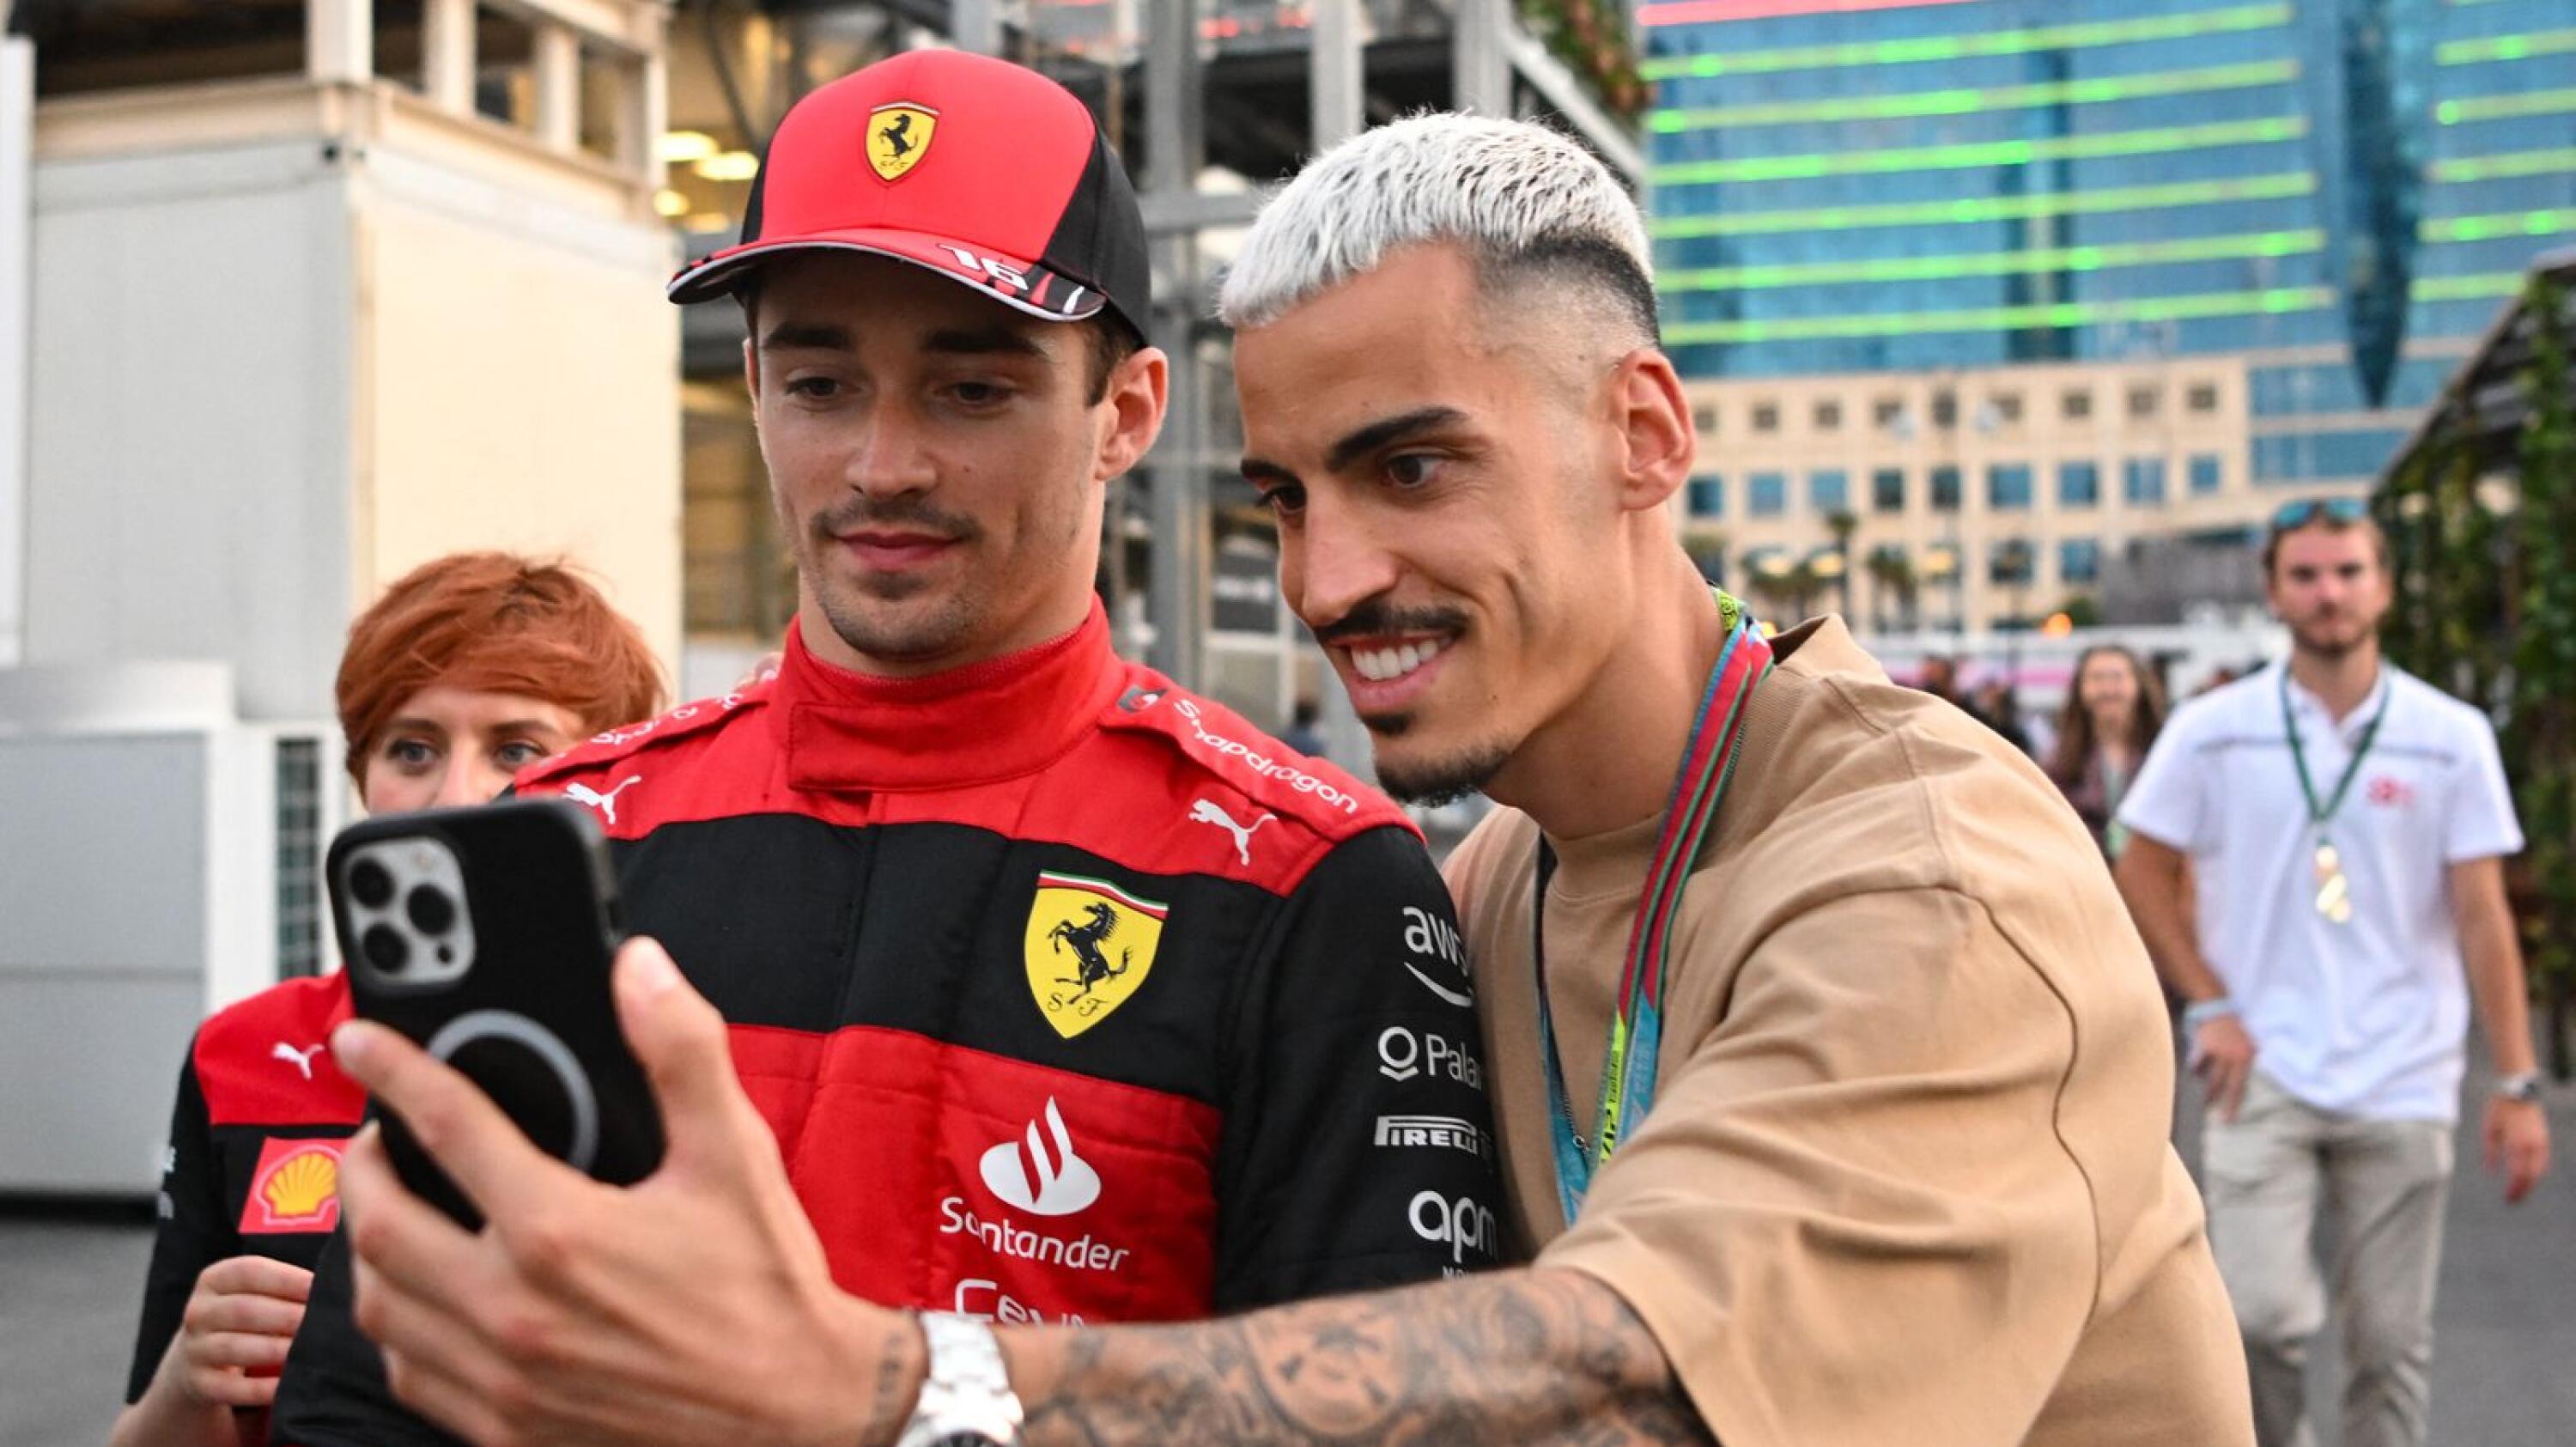 Pole position winner Ferrari's Monegasque driver Charles Leclerc poses for pictures with fans after the qualifying session for the Formula One Azerbaijan Grand Prix at the Baku City Circuit in Baku on Saturday